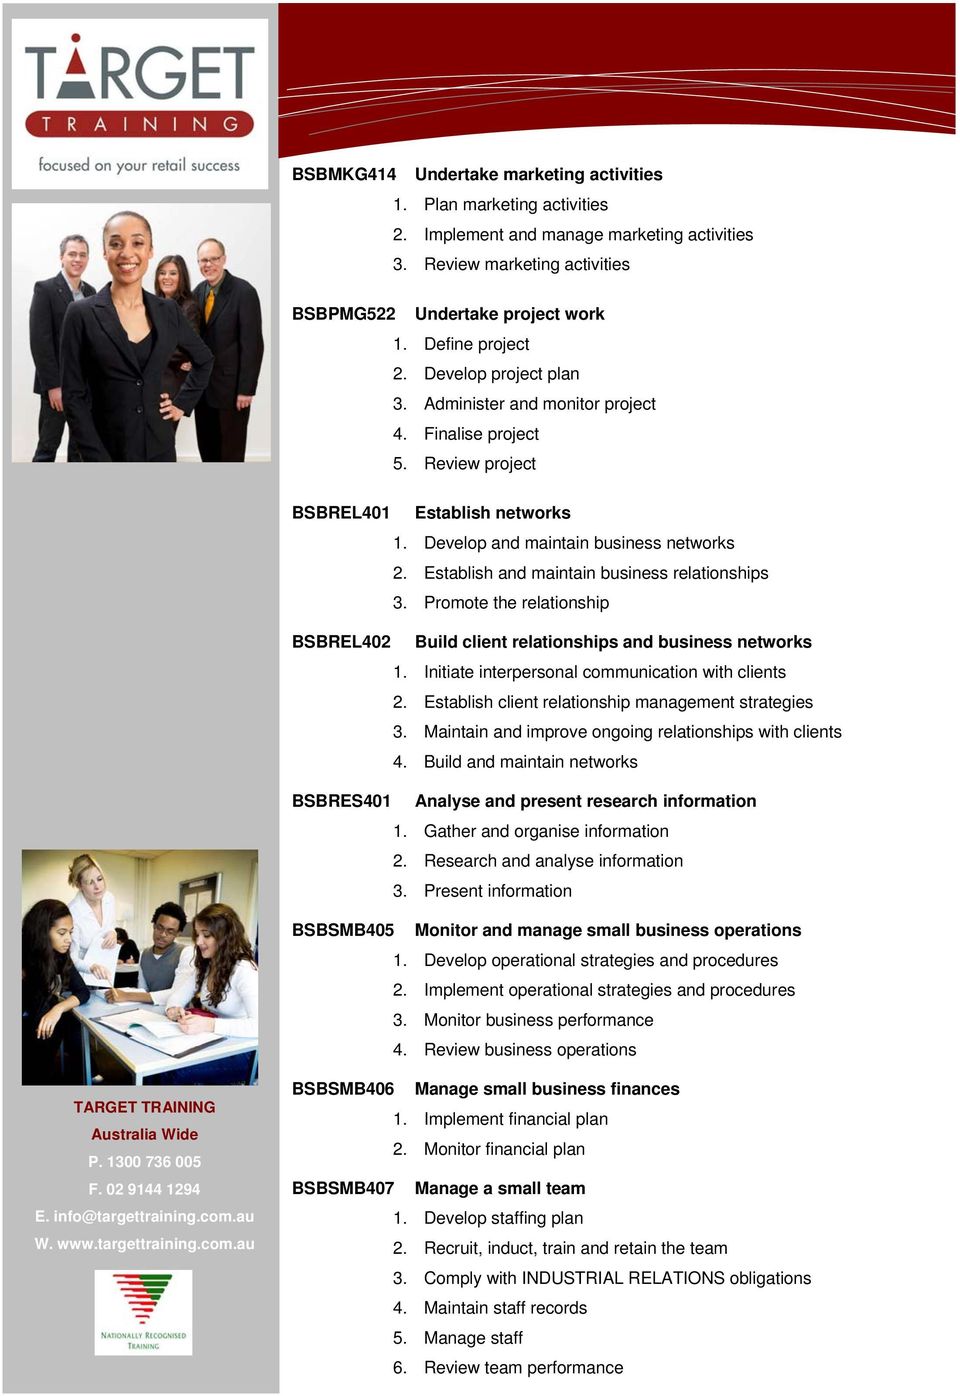 Establish and maintain business relationships 3. Promote the relationship BSBREL402 Build client relationships and business networks 1. Initiate interpersonal communication with clients 2.